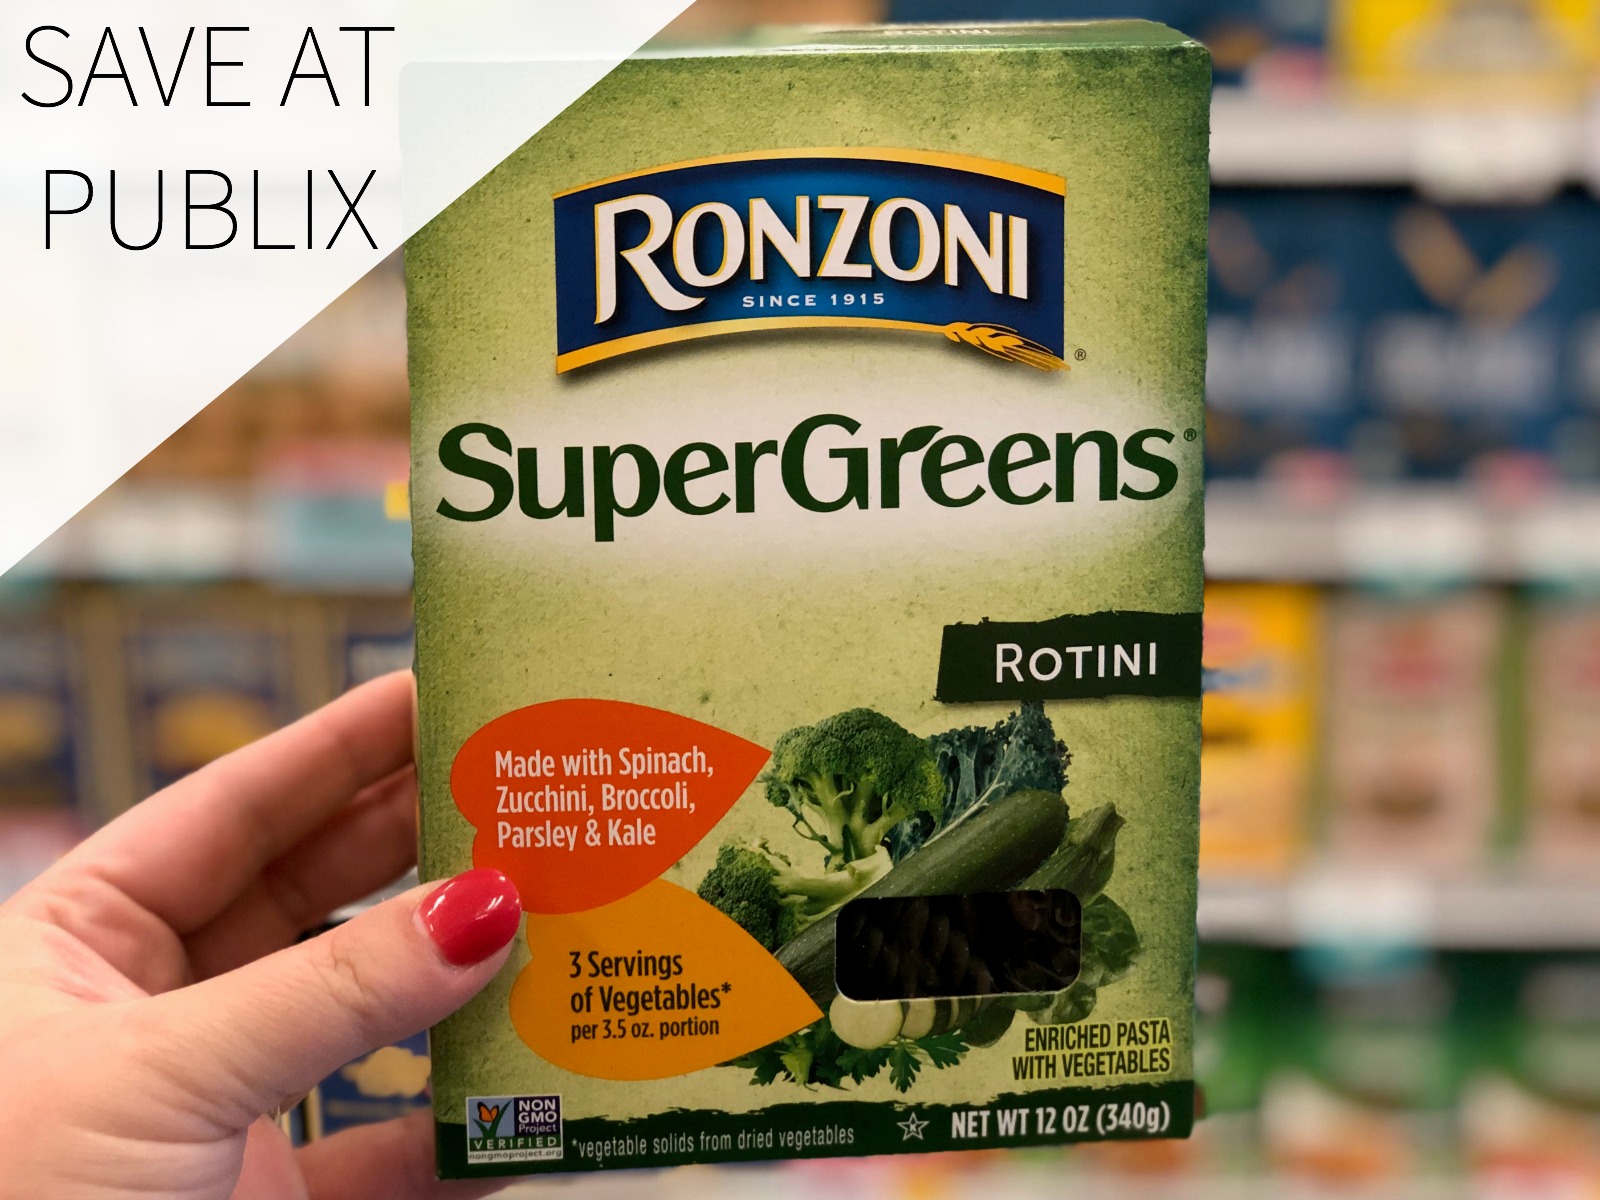 Save On Your Purchase Of Ronzoni SuperGreens At Publix – Clip Your Coupon